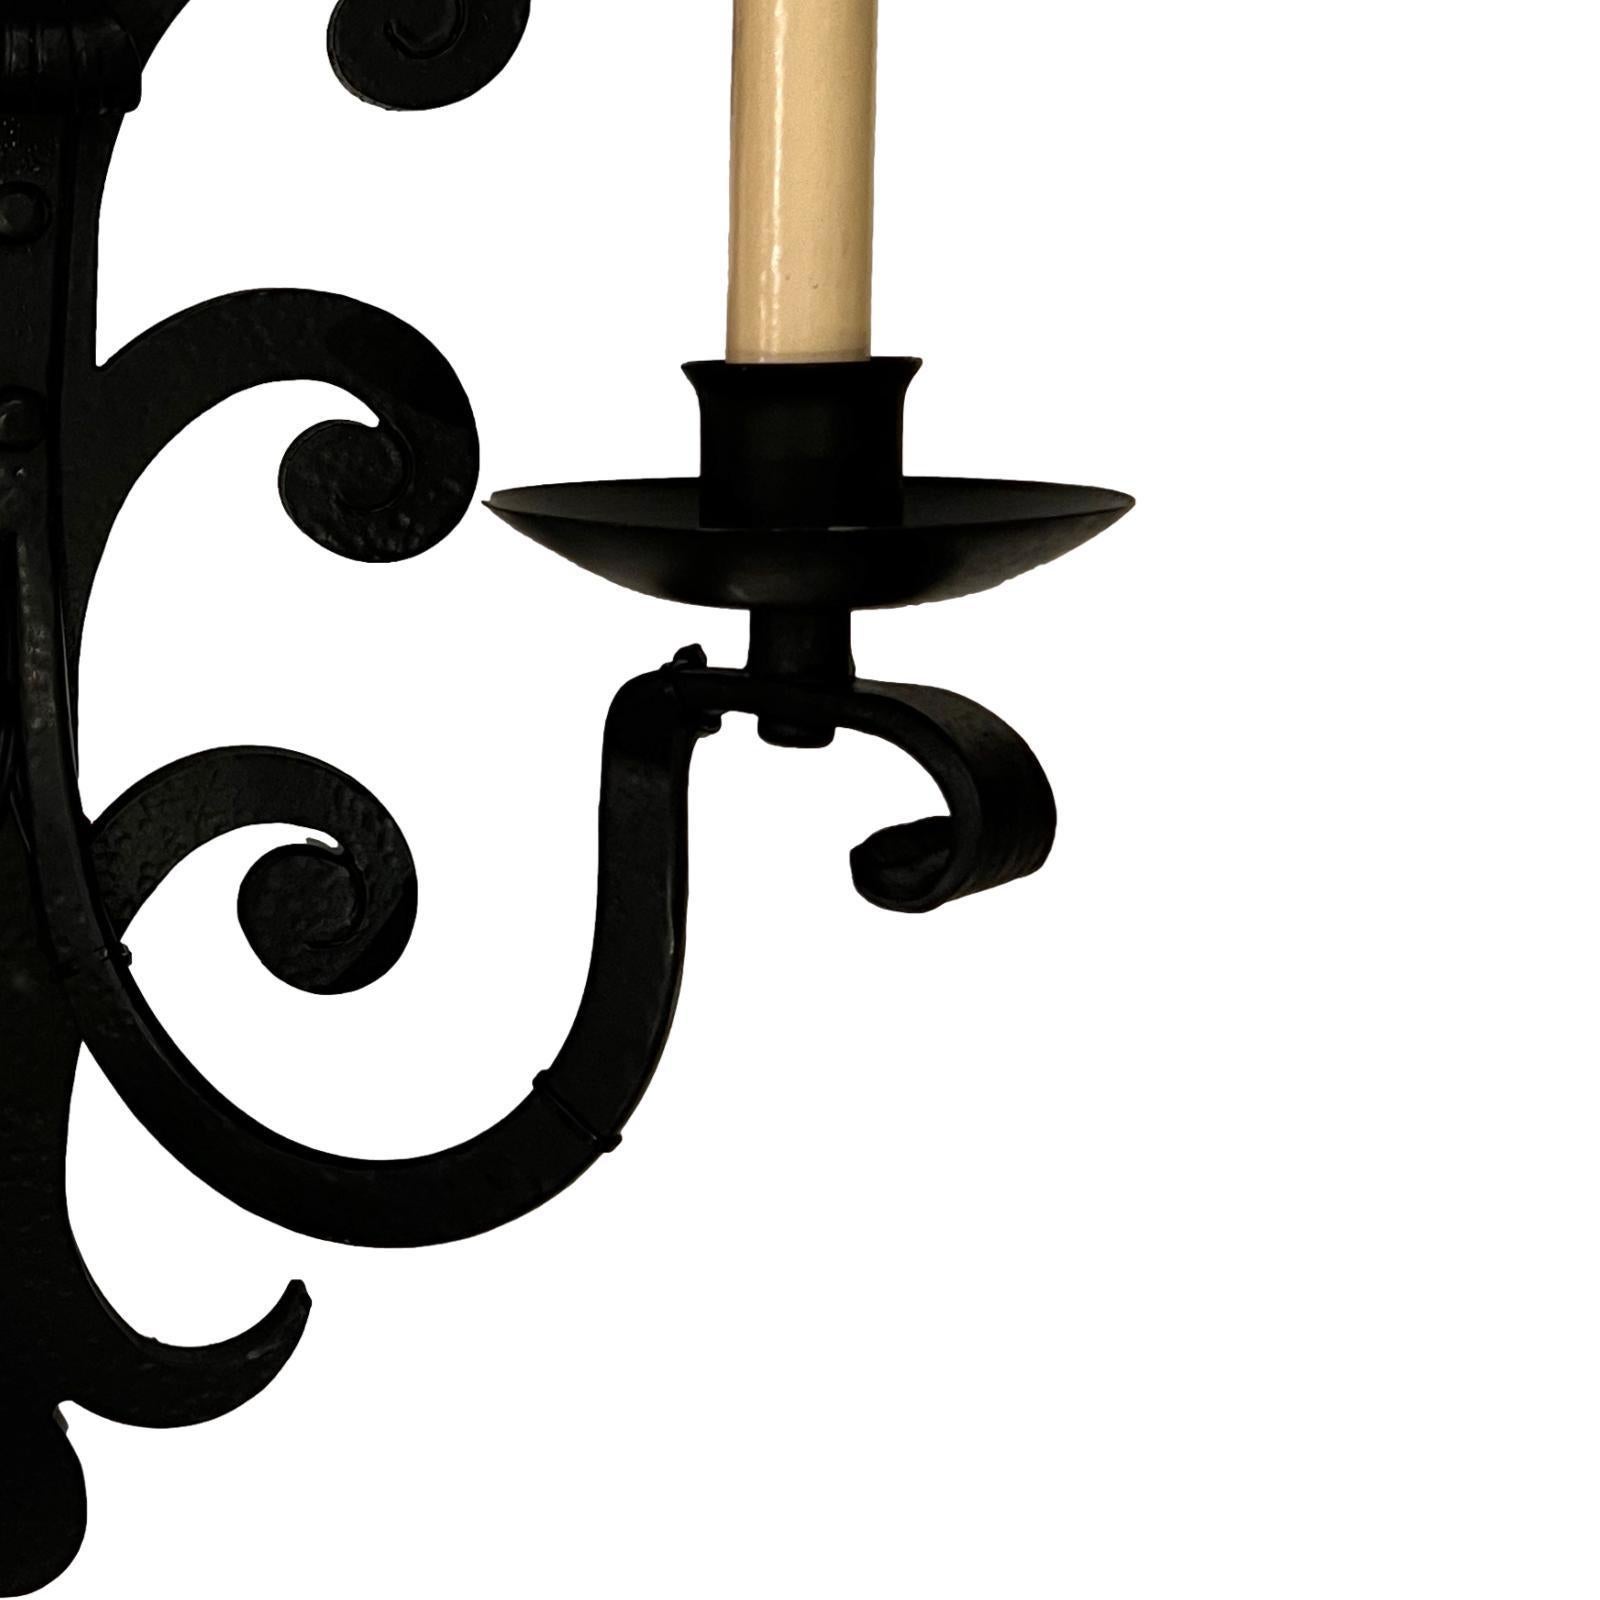 Pair of French circa 1900 large wrought iron two-arm sconces.

Measurements:
Height: 19.5